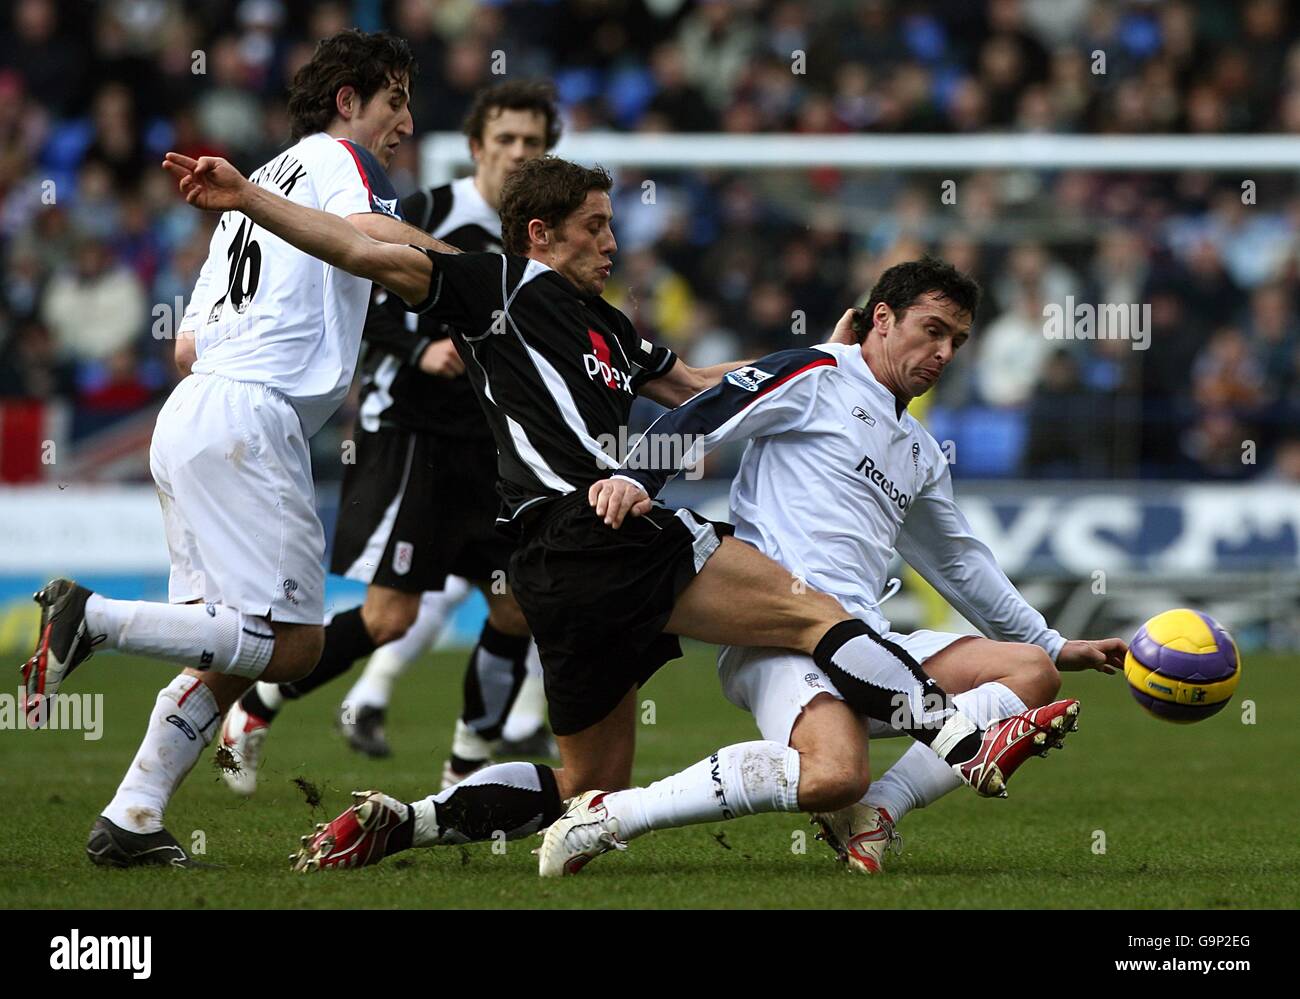 Fulham's Michael Brown (center) and Bolton Wanderers' Gary Speed (right) battle for the ball, as Bolton's Andranik Teymourian (left) follows Stock Photo